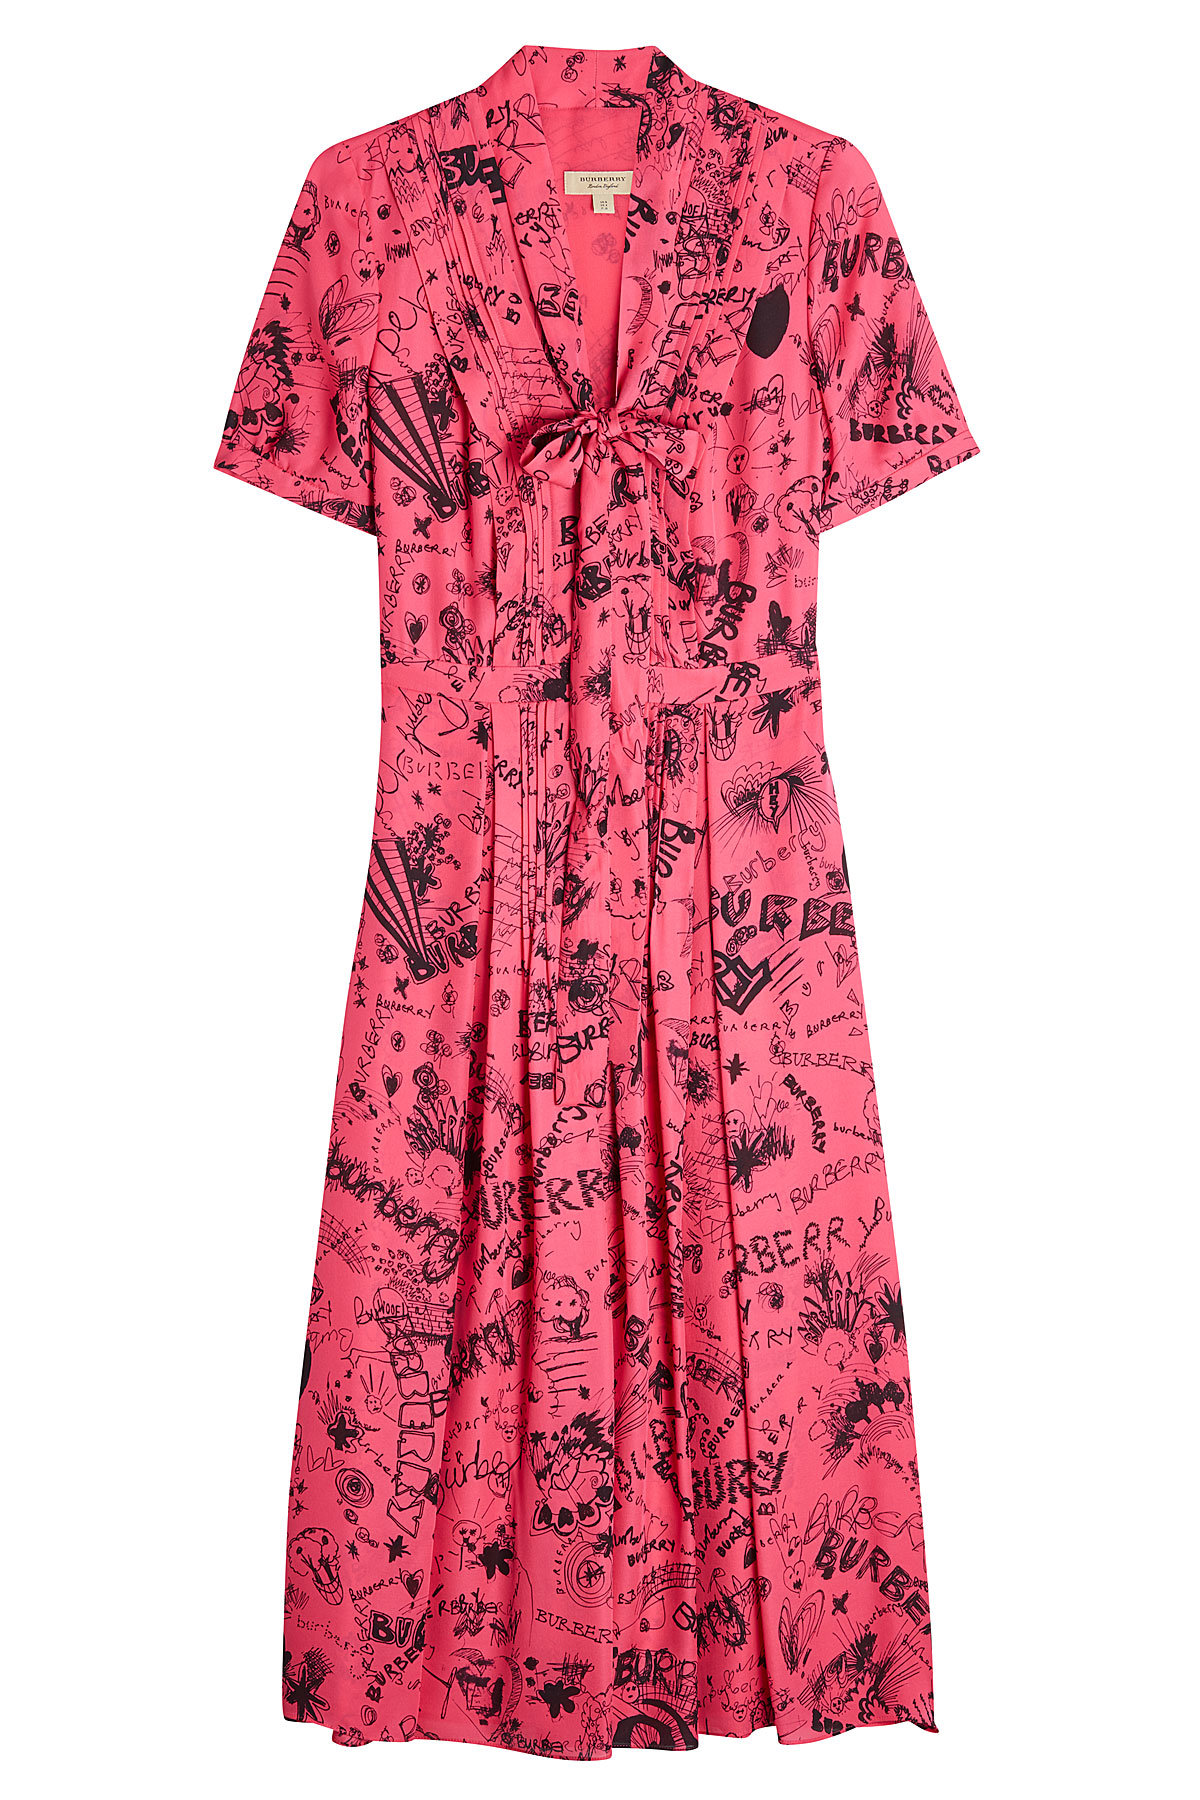 Burberry - Antoniana Doodle Dress in Mulberry Silk